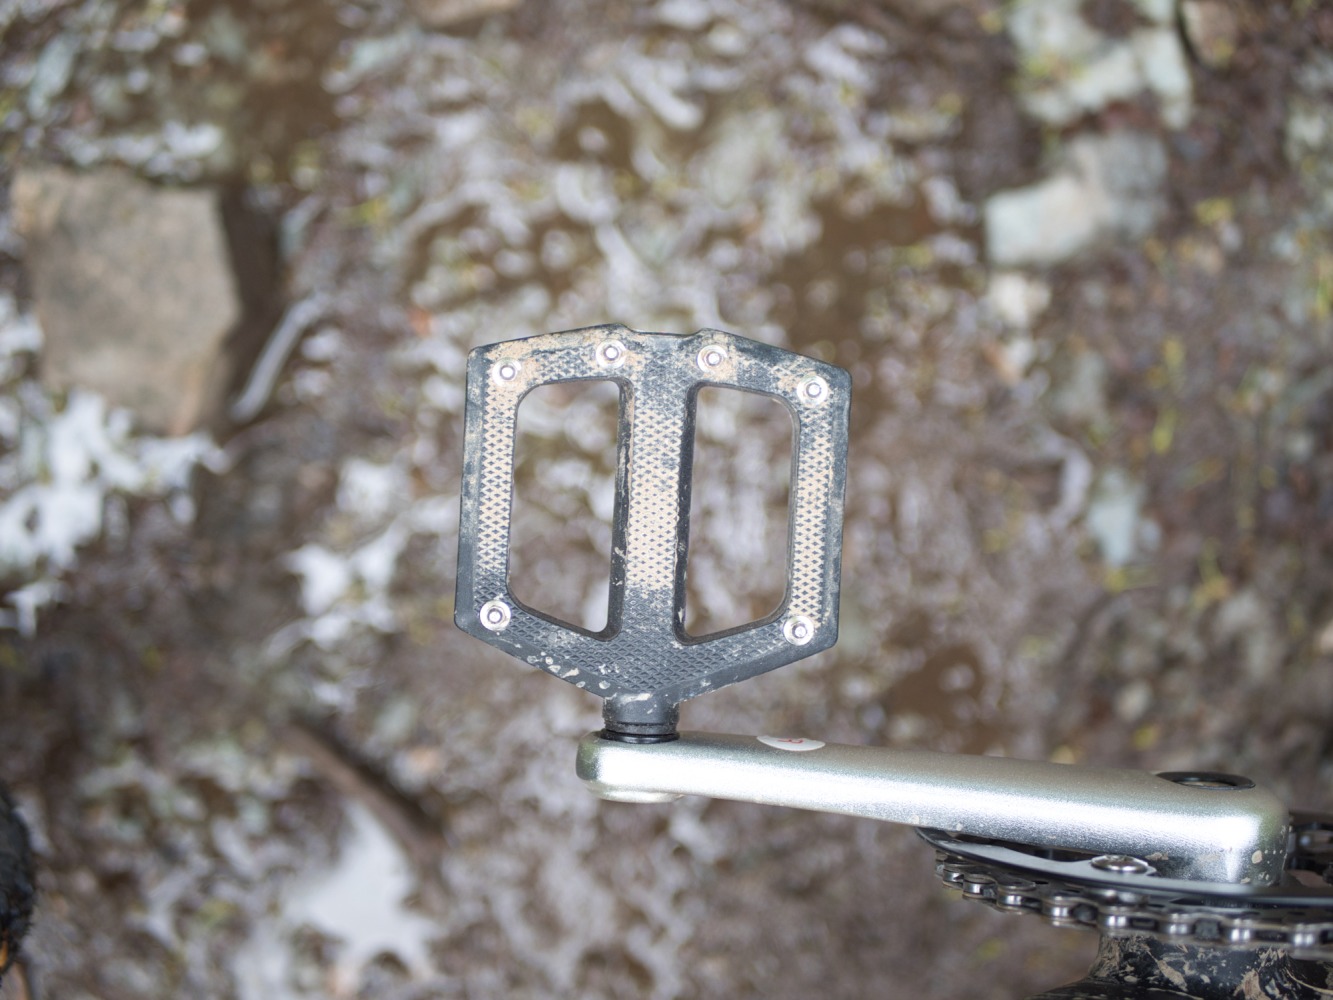 woom OFF AIR 5 review: close up top-down view of the woom OFF AIR 5 mountain bike pedal